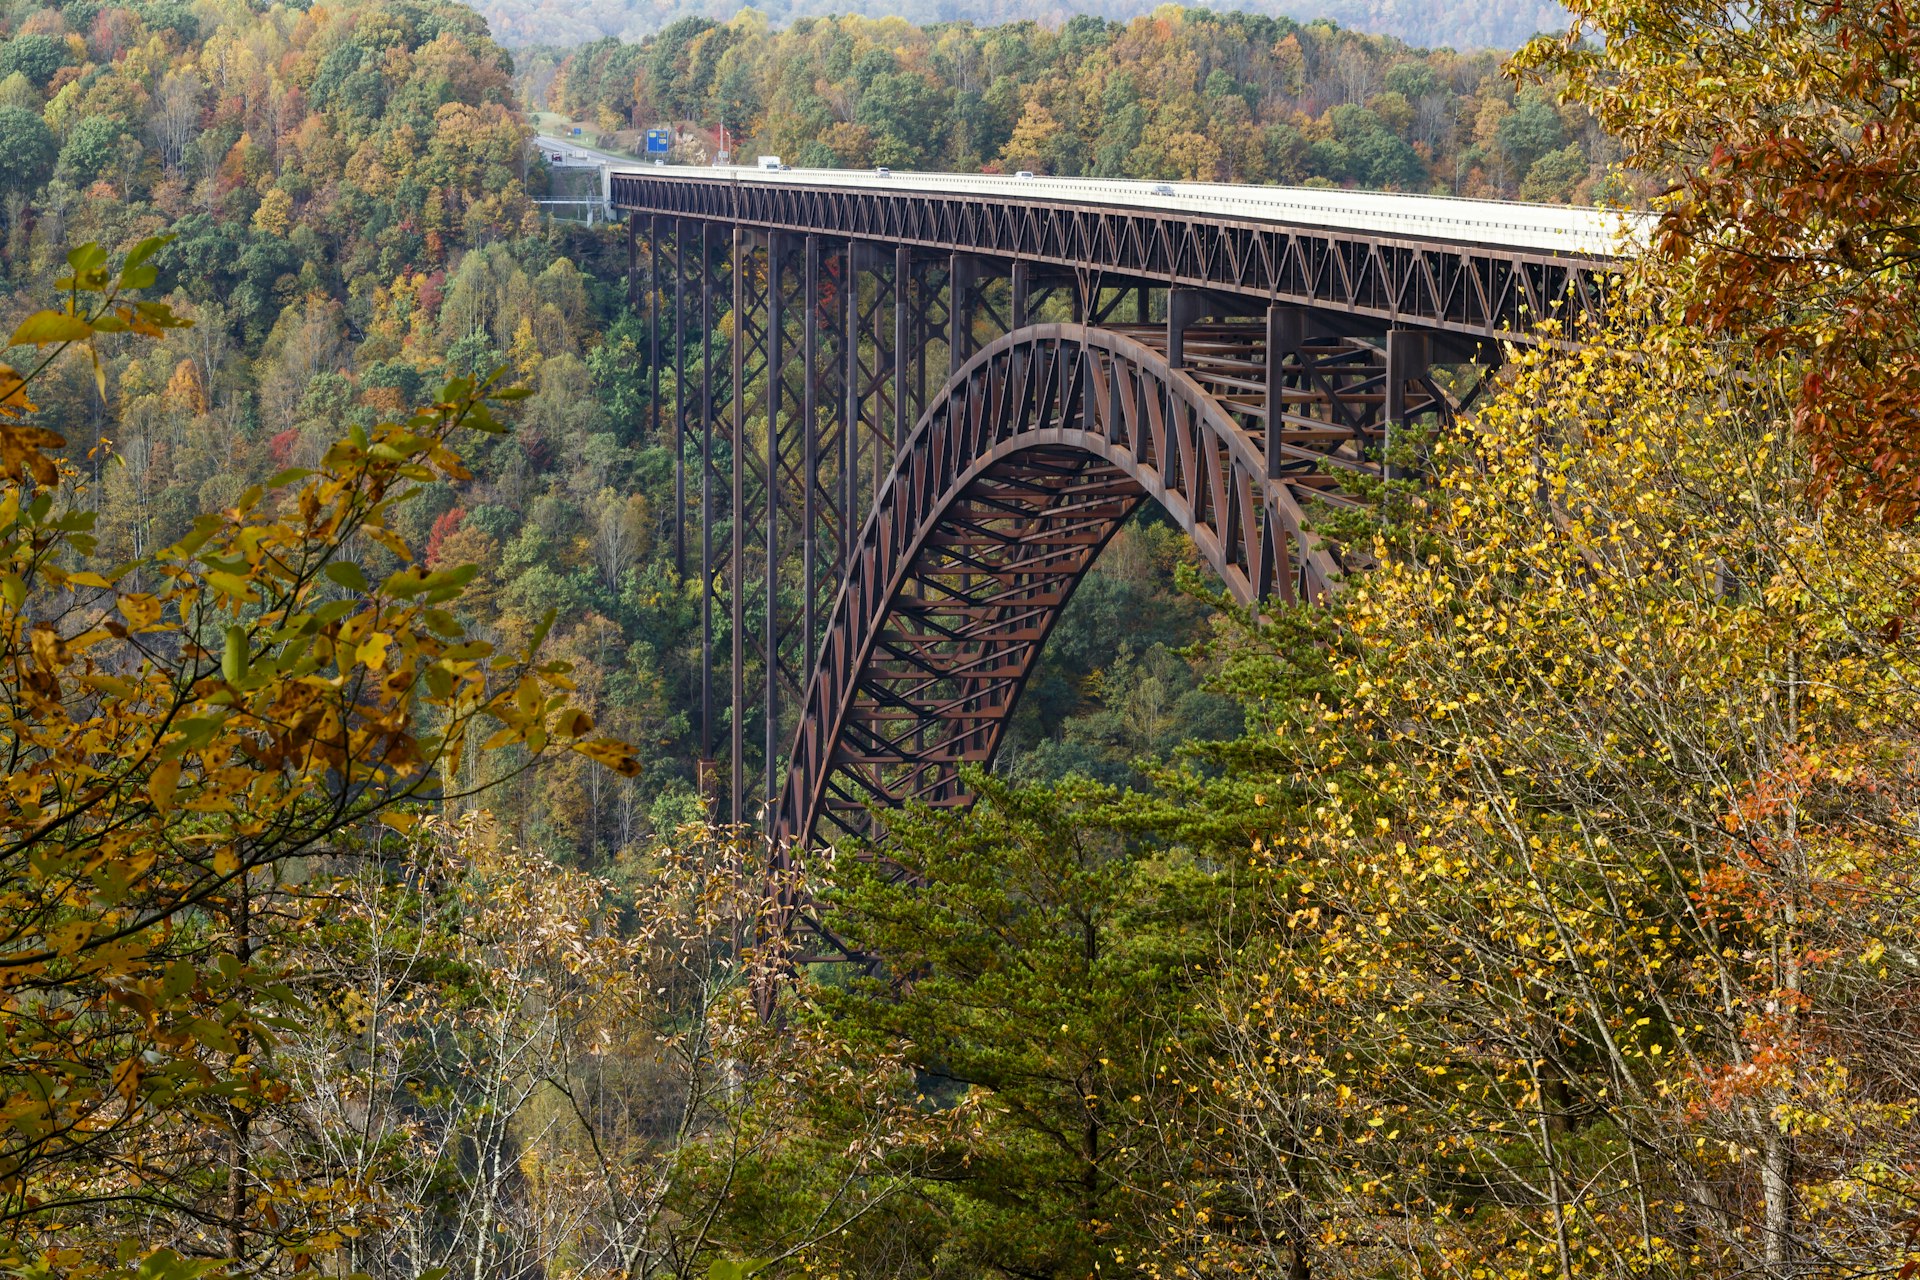 Cars driving across The New River Gorge Bridge in West Virginia on a crisp autumn day